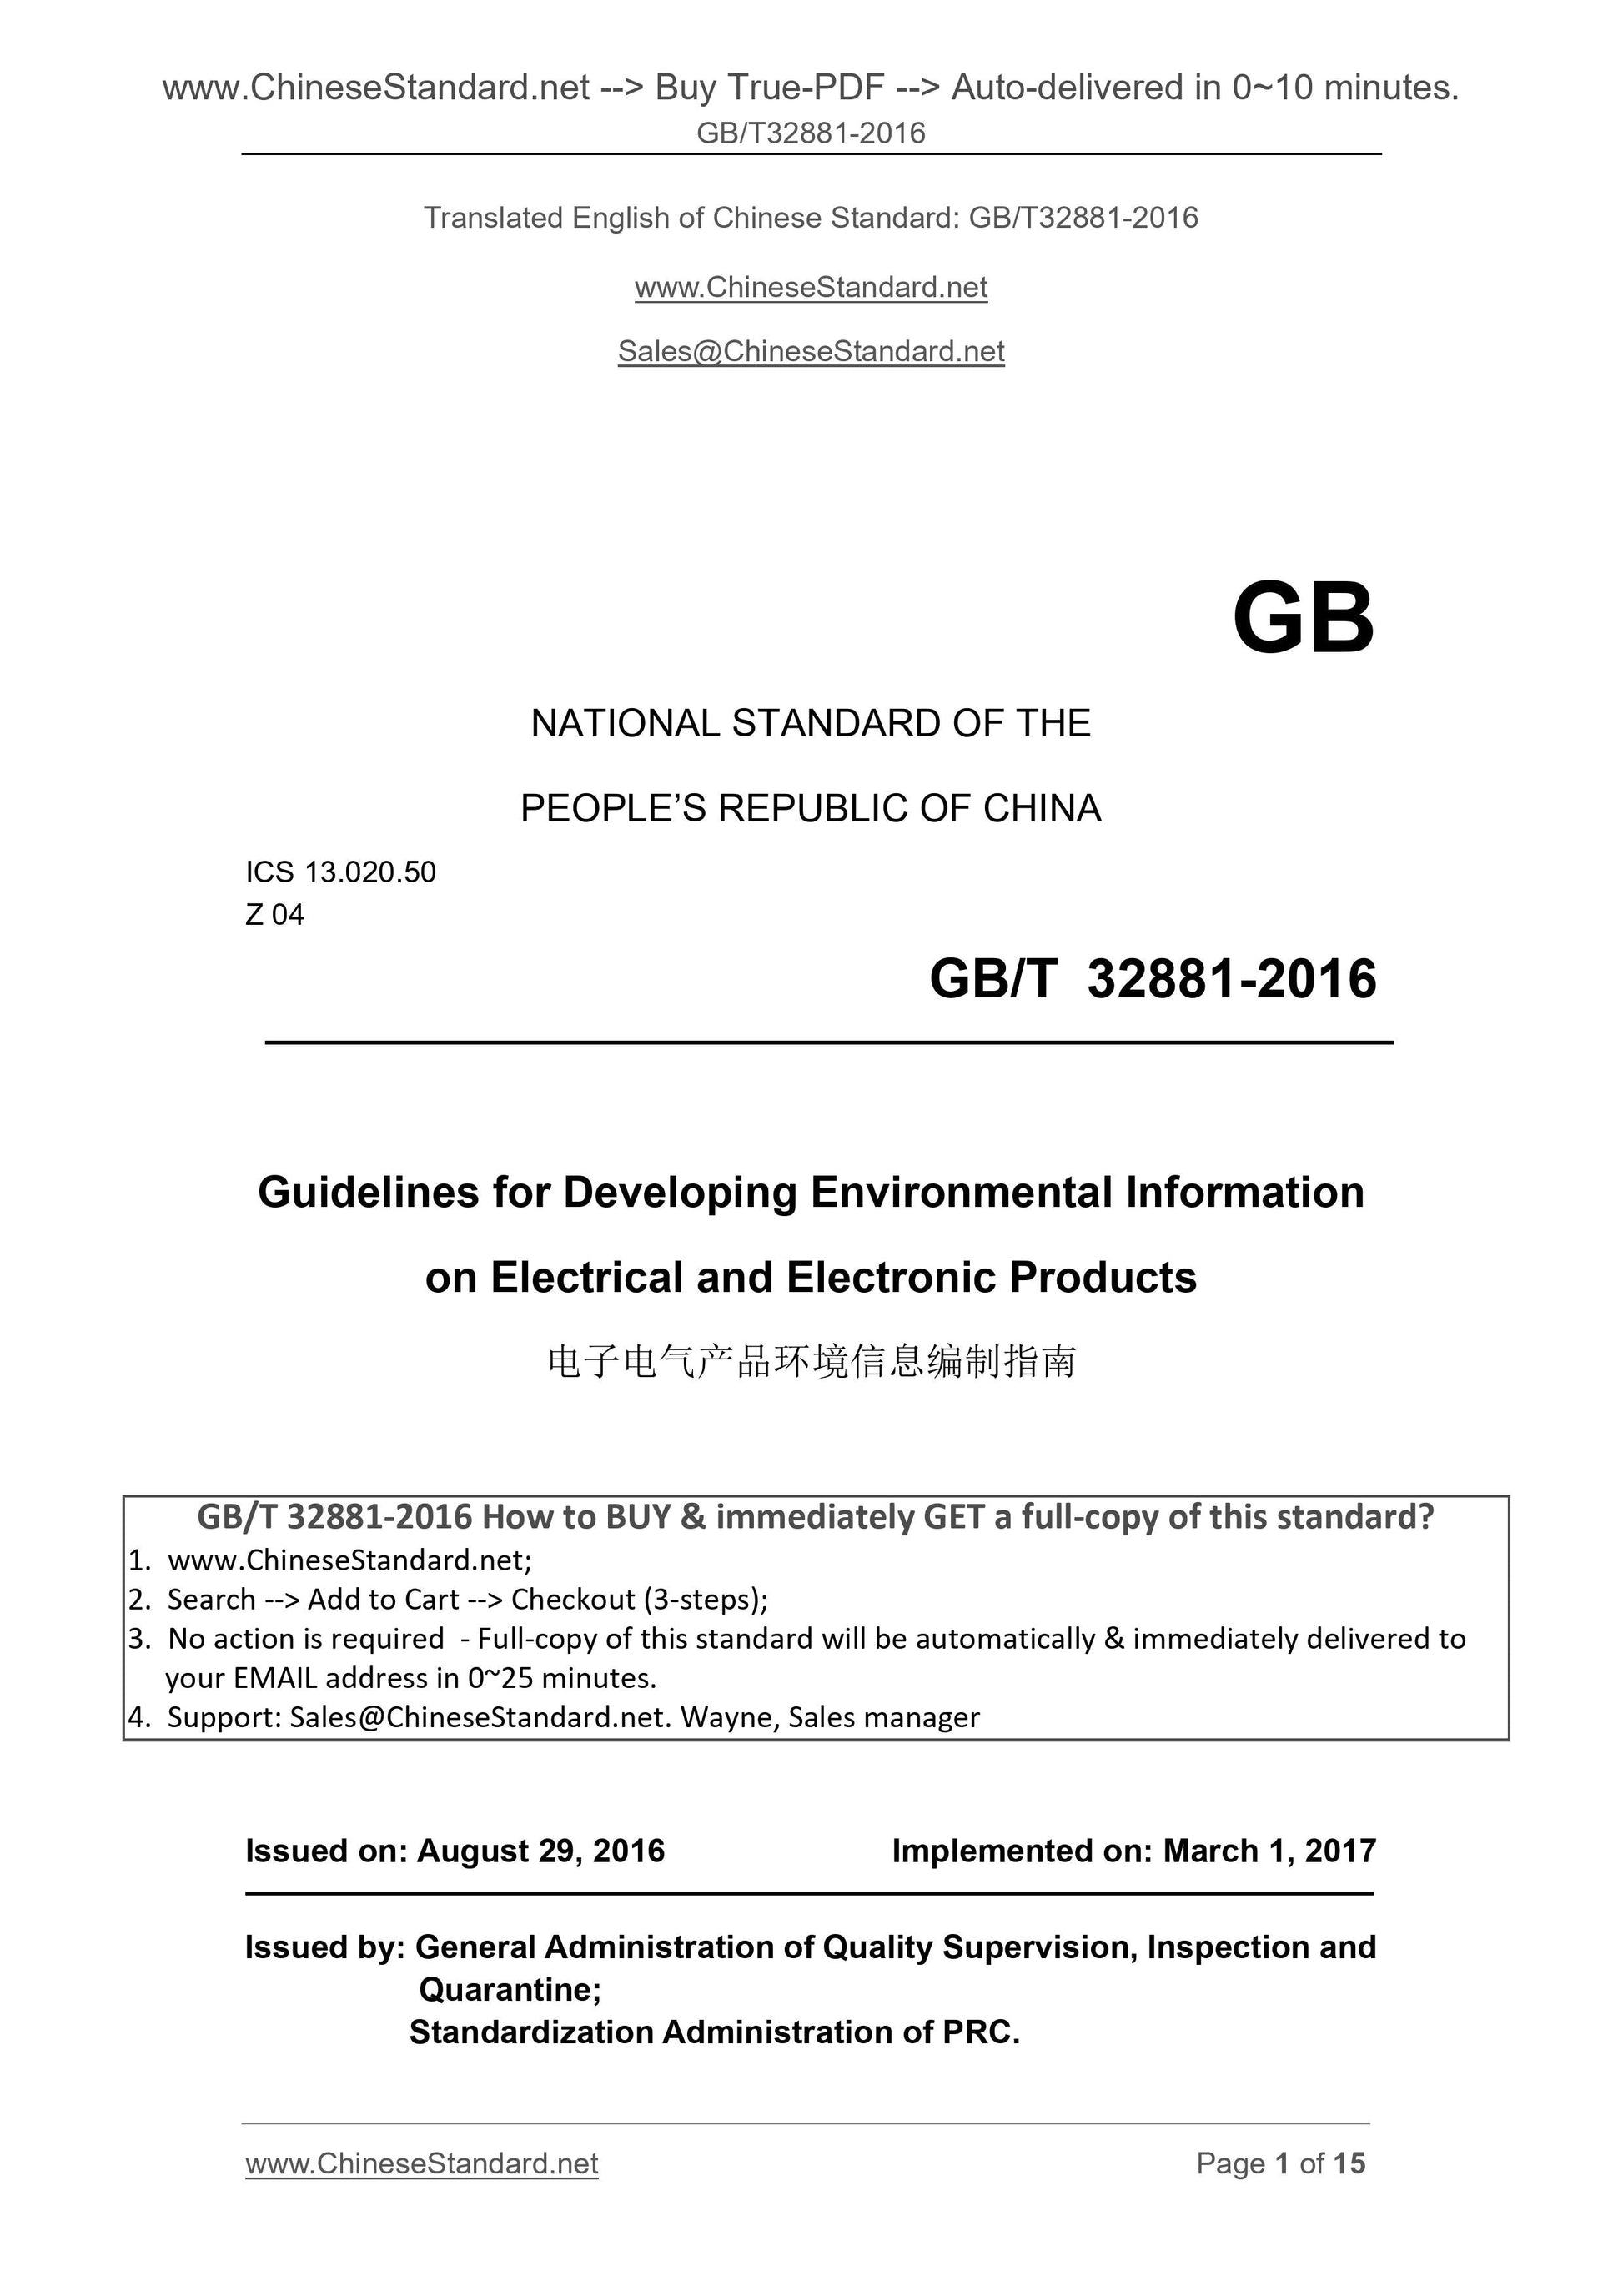 GB/T 32881-2016 Page 1